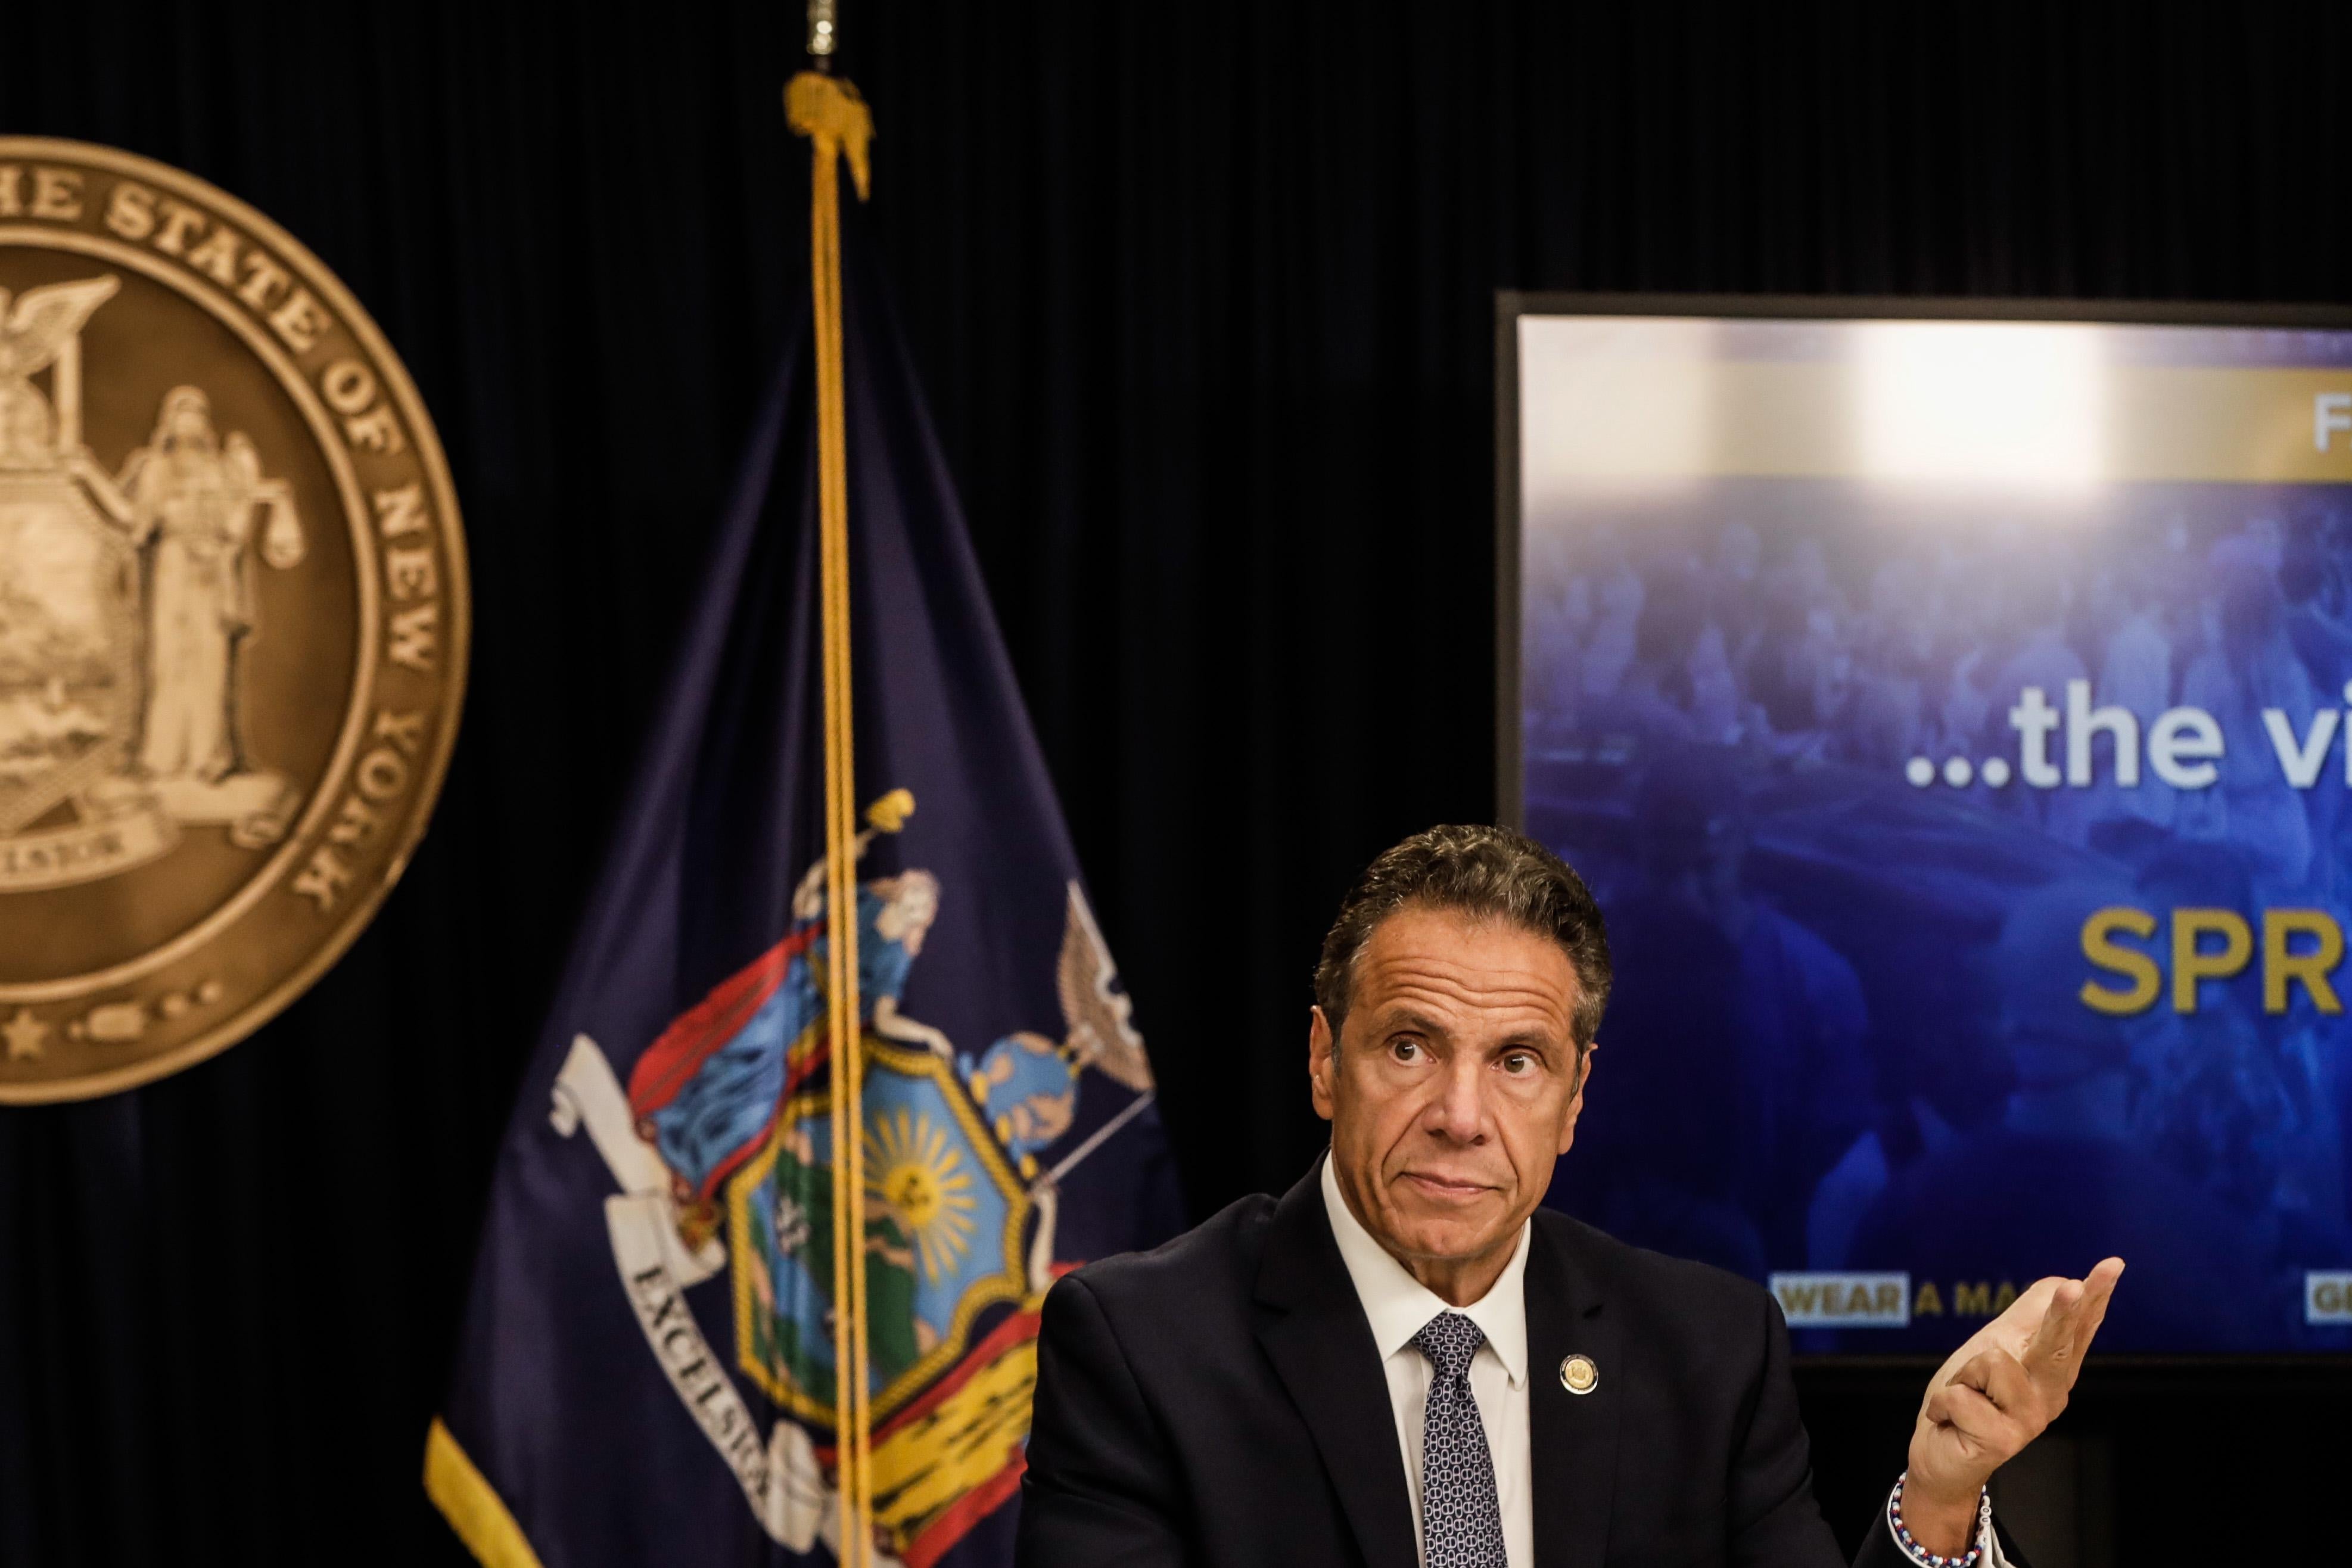 Andrew Cuomo gestures at a screen that says "the virus will SPREAD."